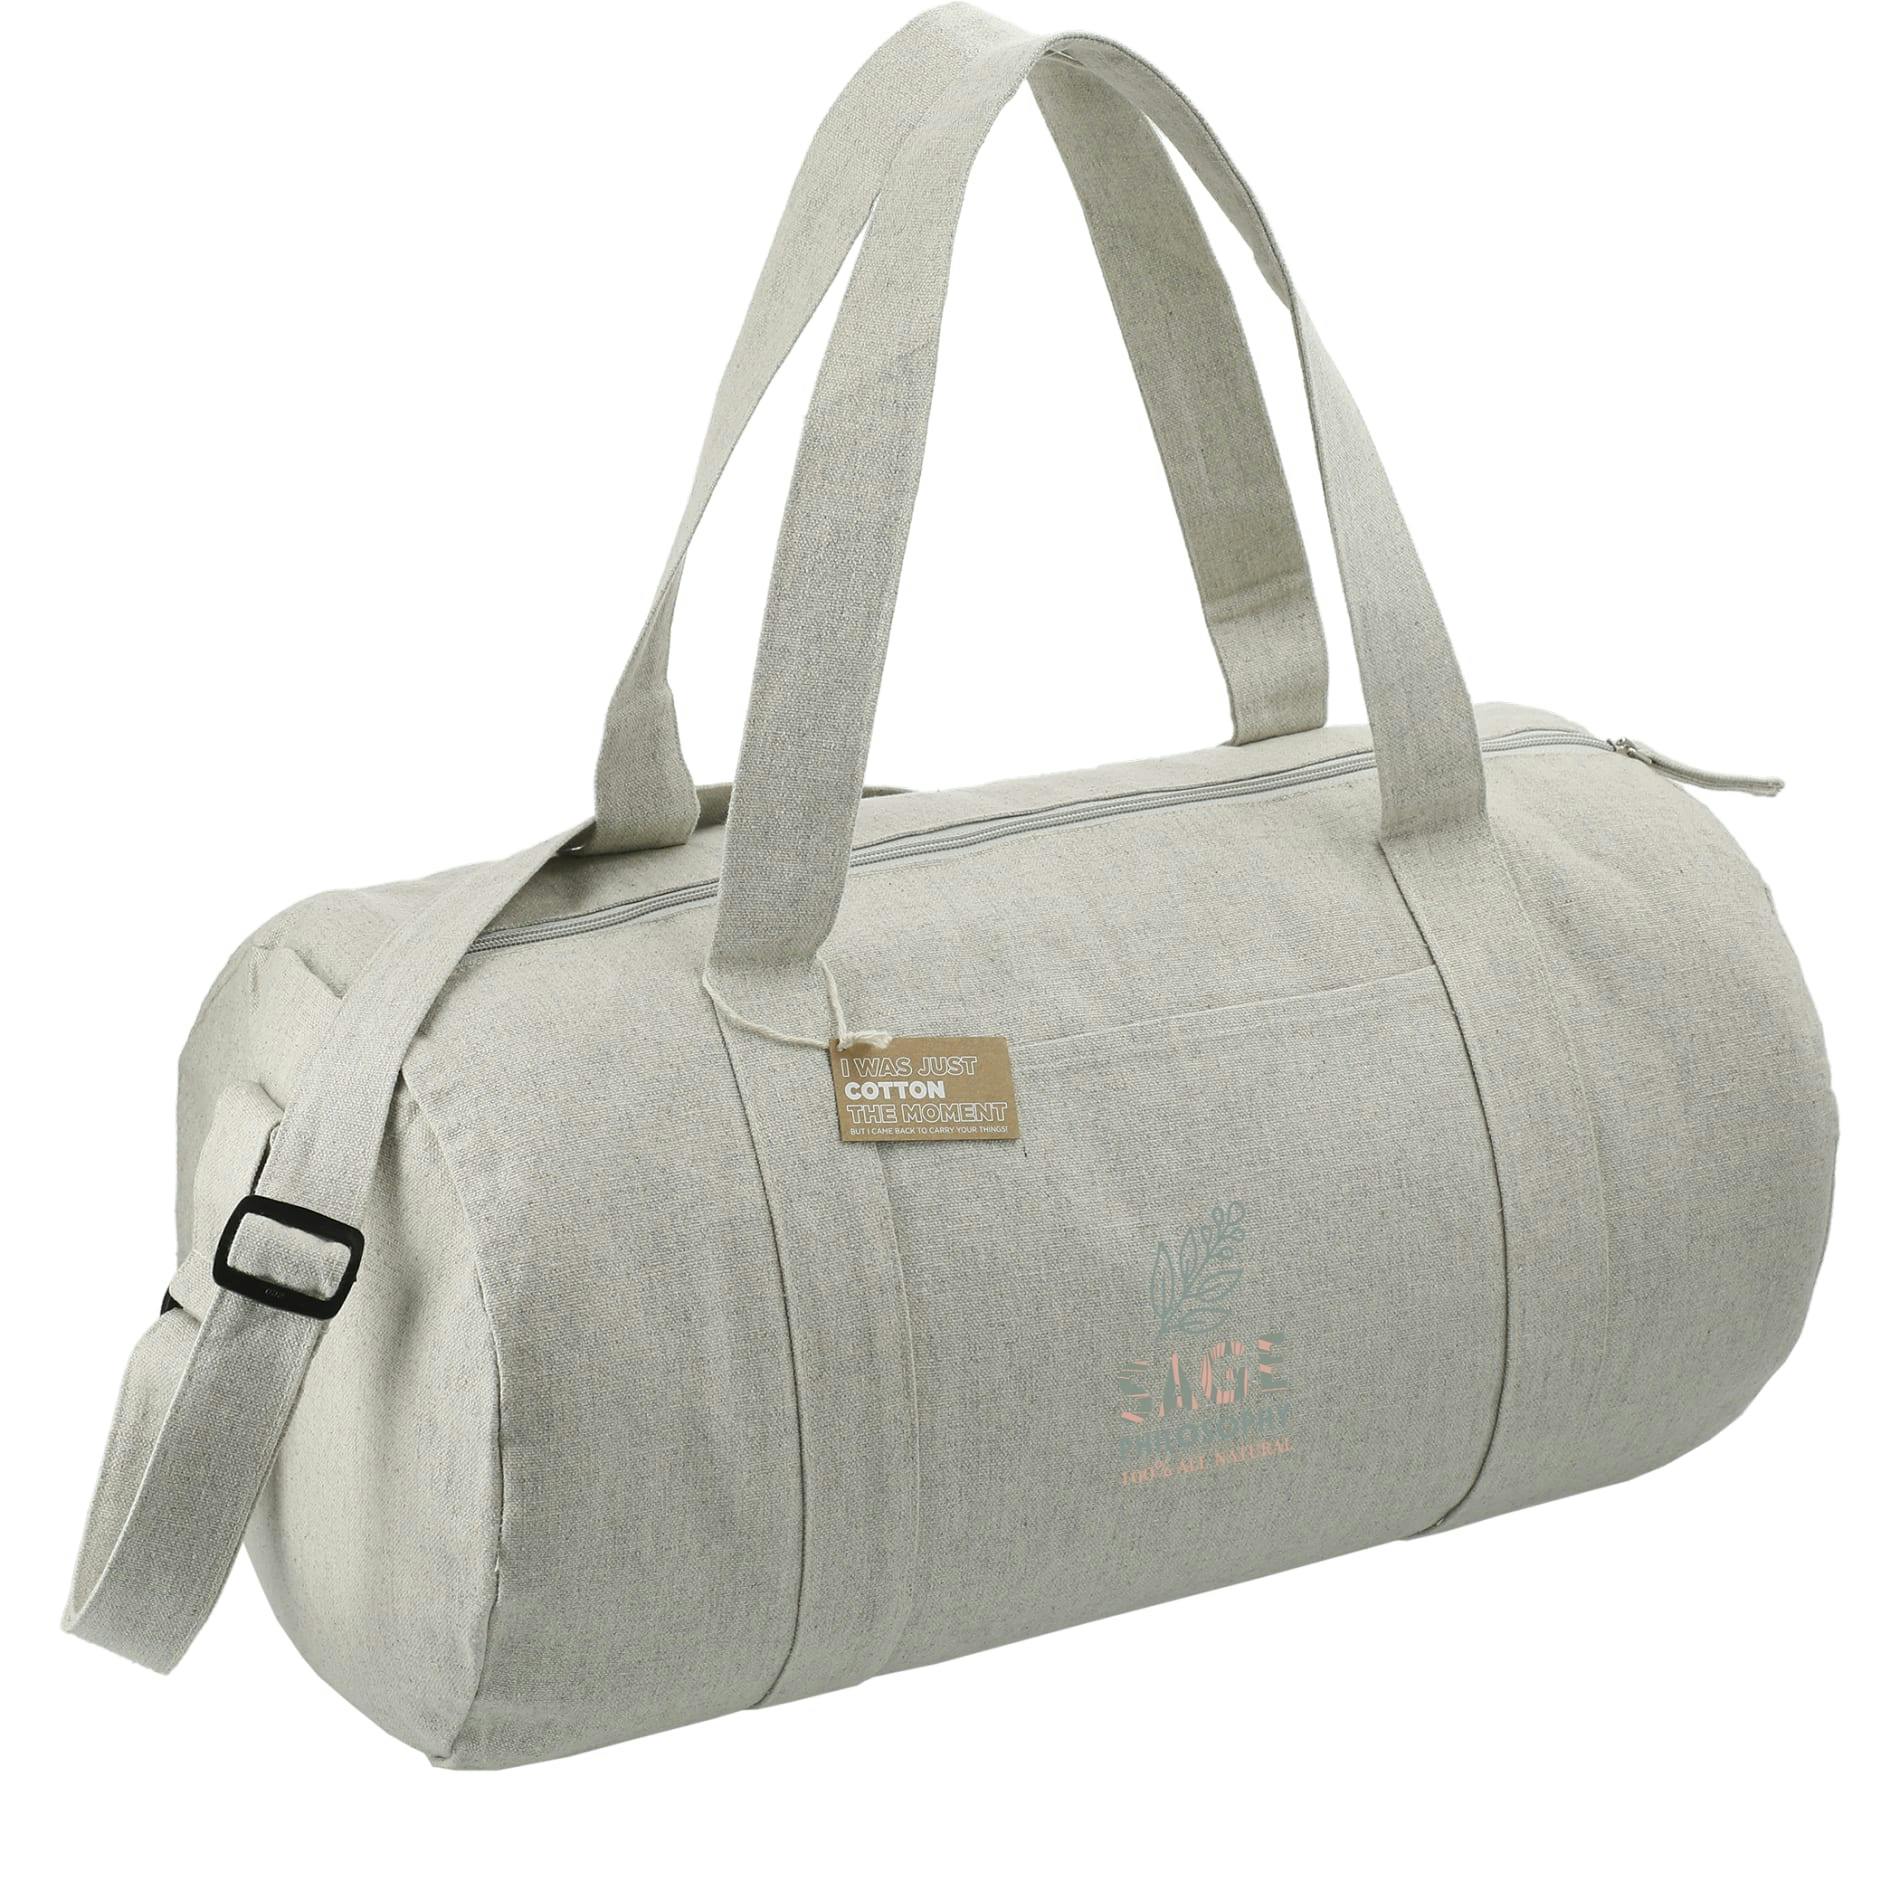 Repose 10oz Recycled Cotton Barrel Duffel - additional Image 2